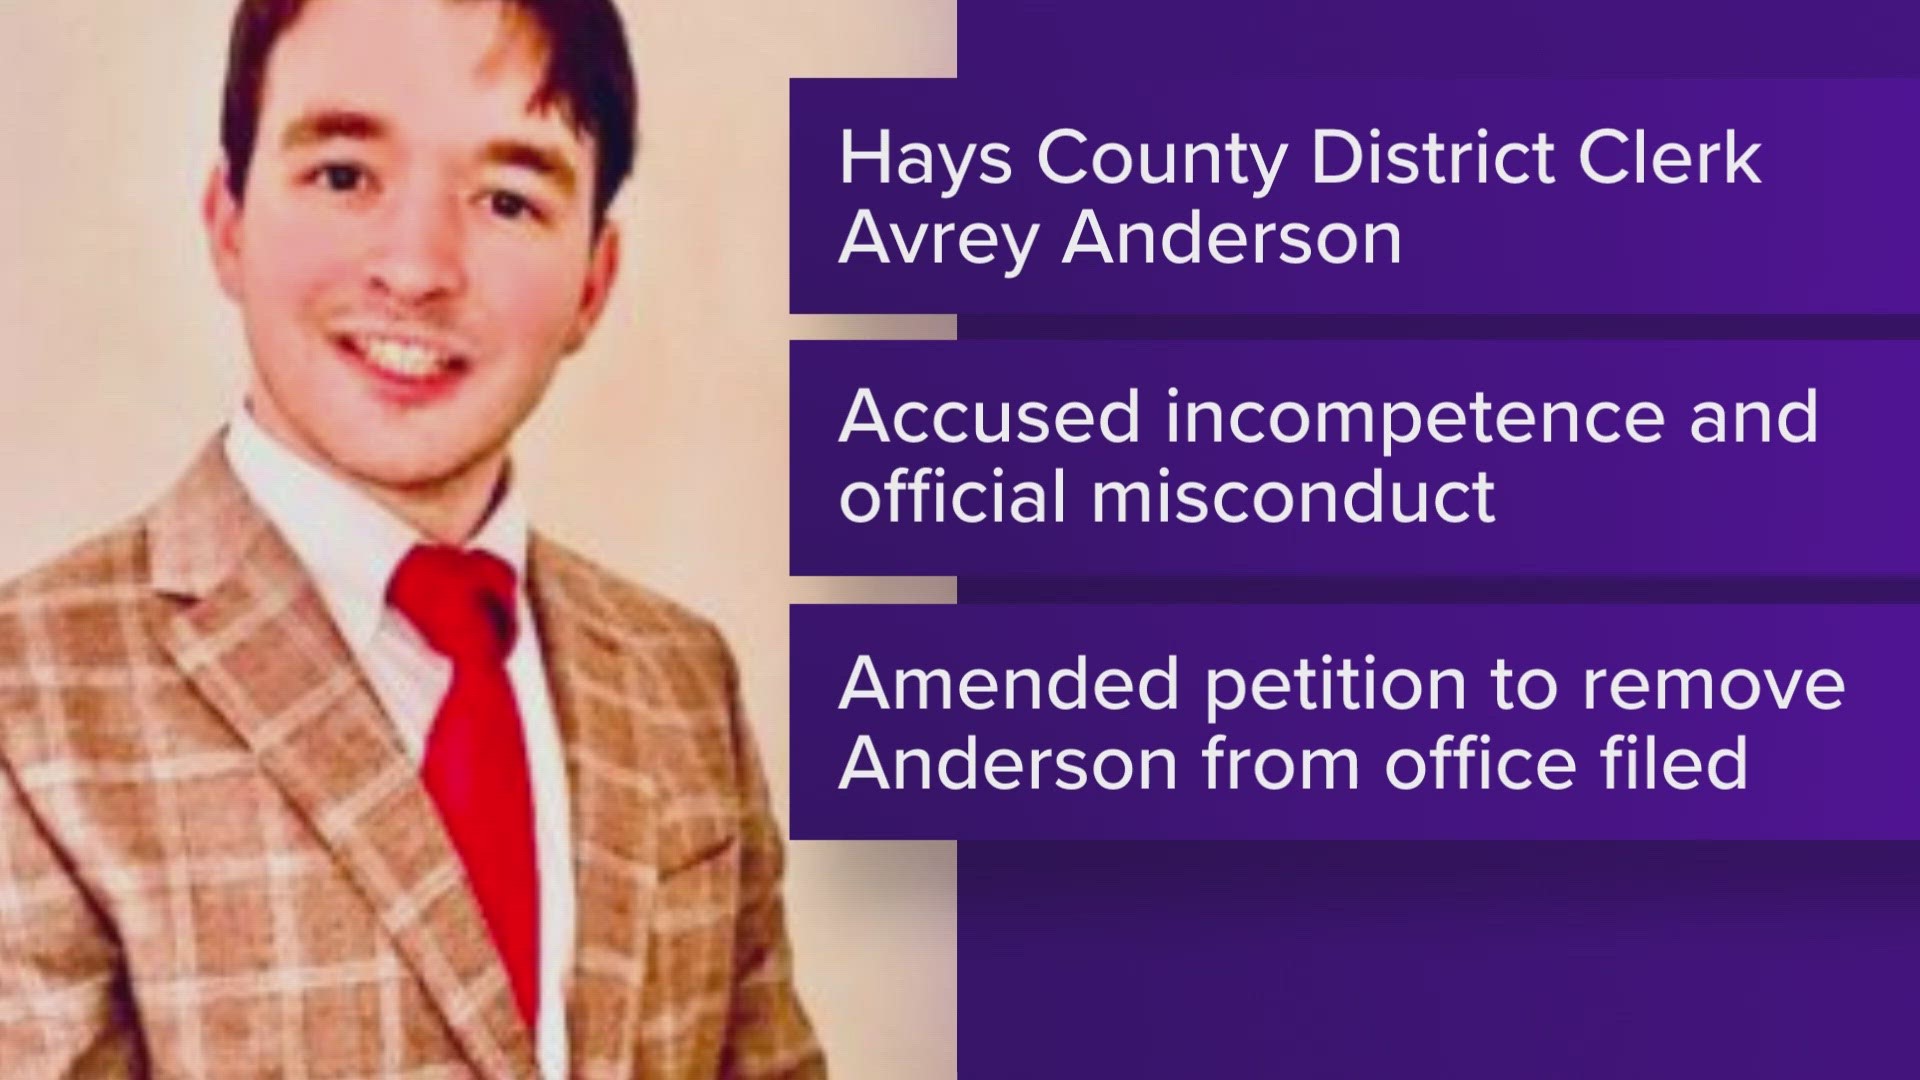 The petition accused Avery Anderson of "incompetence" and "official misconduct."